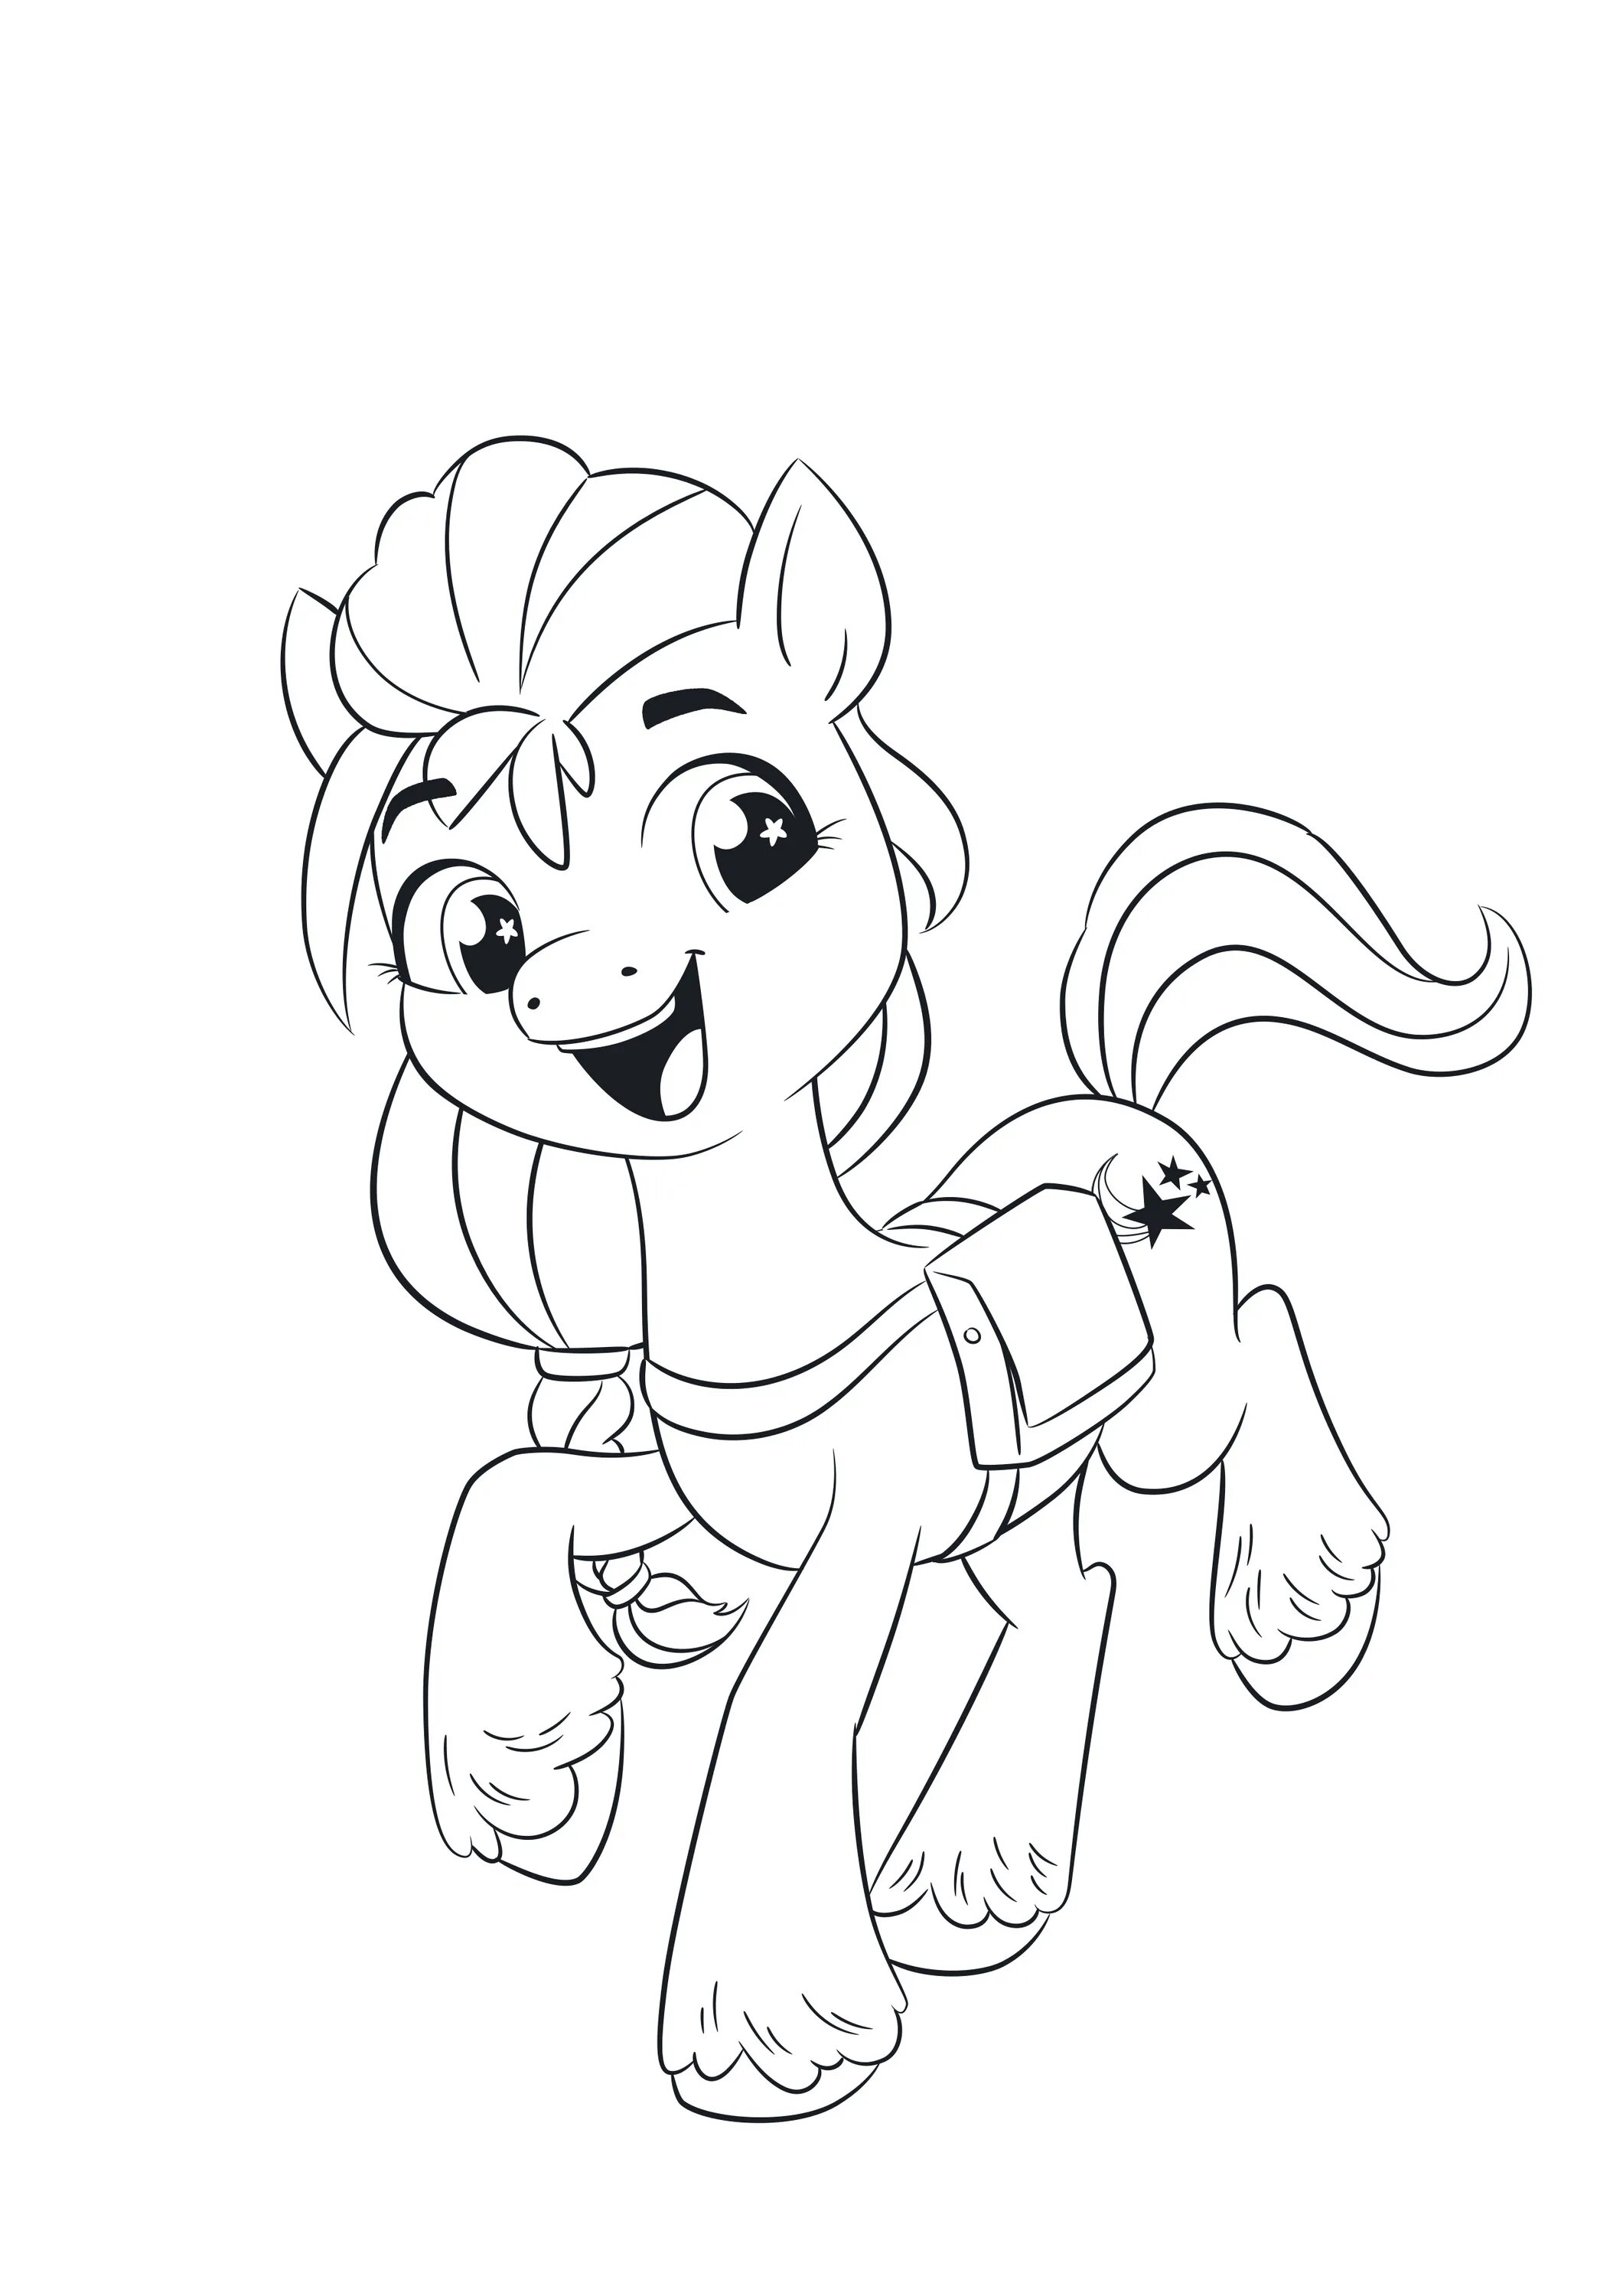 Outstanding pip pony coloring page